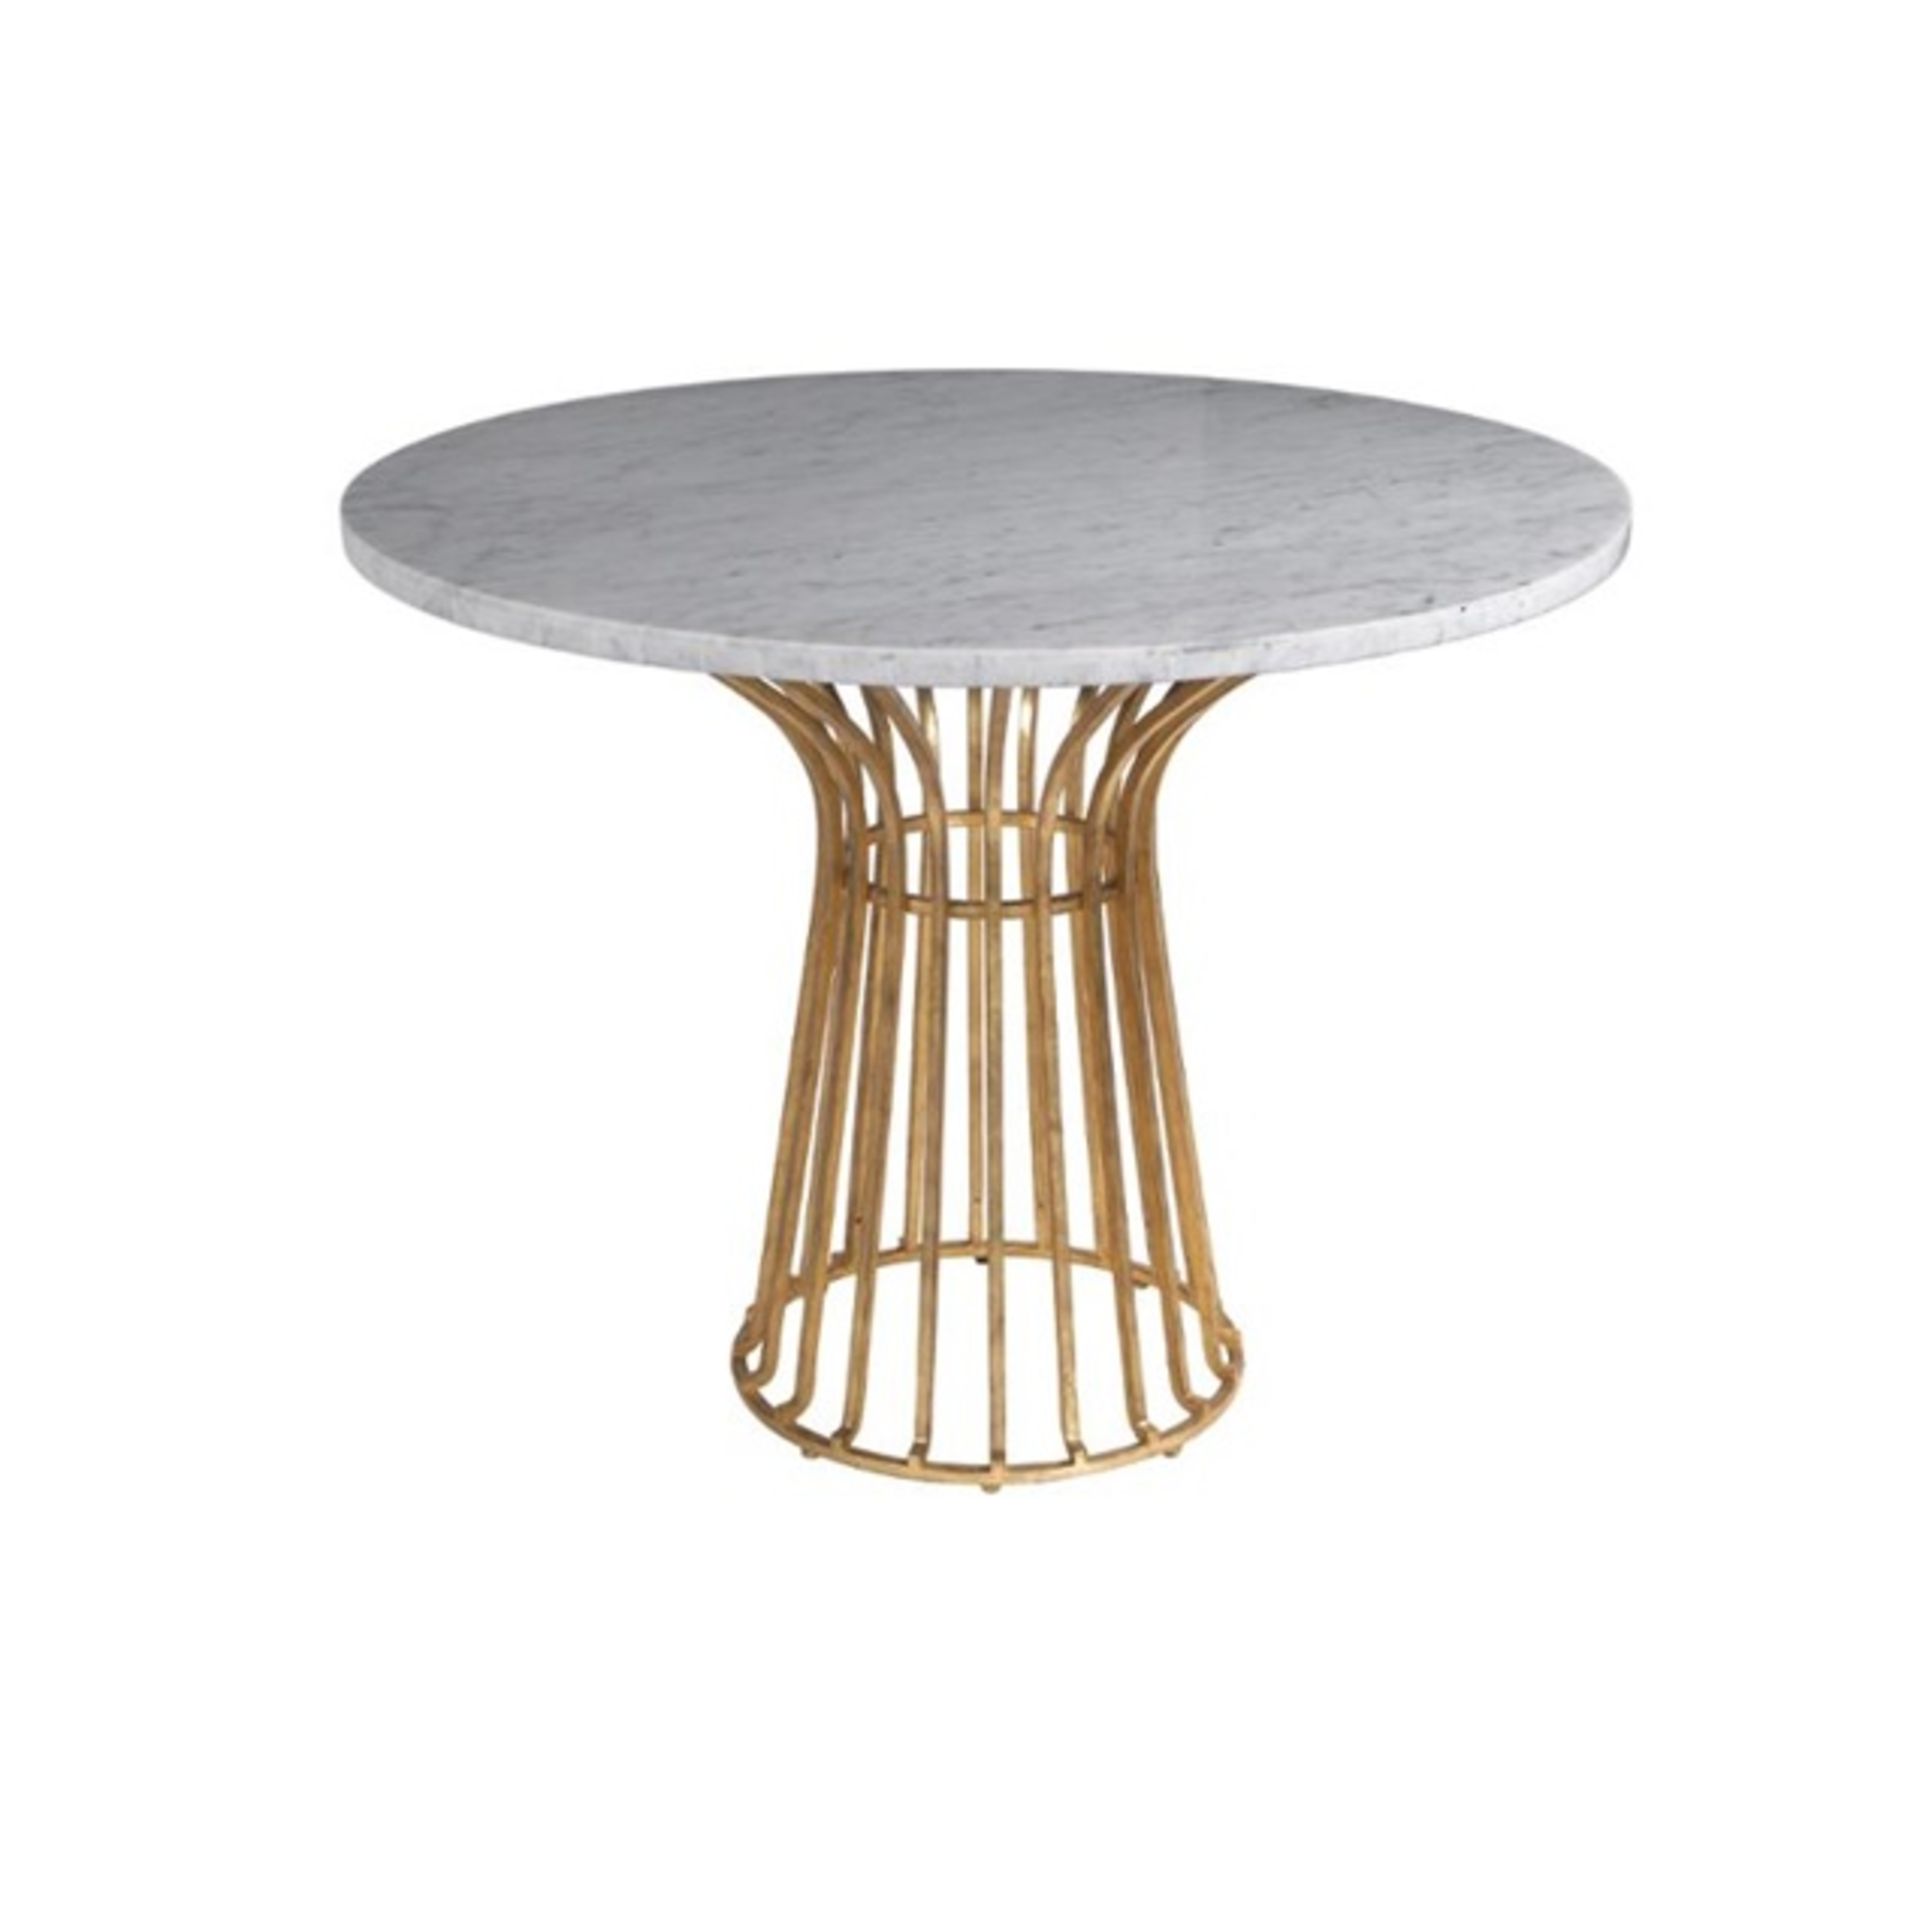 Luxor Dining Table- A Smart Cocktail Dining Table With Gilt Leafed Base And Thick Real Marble Veneer